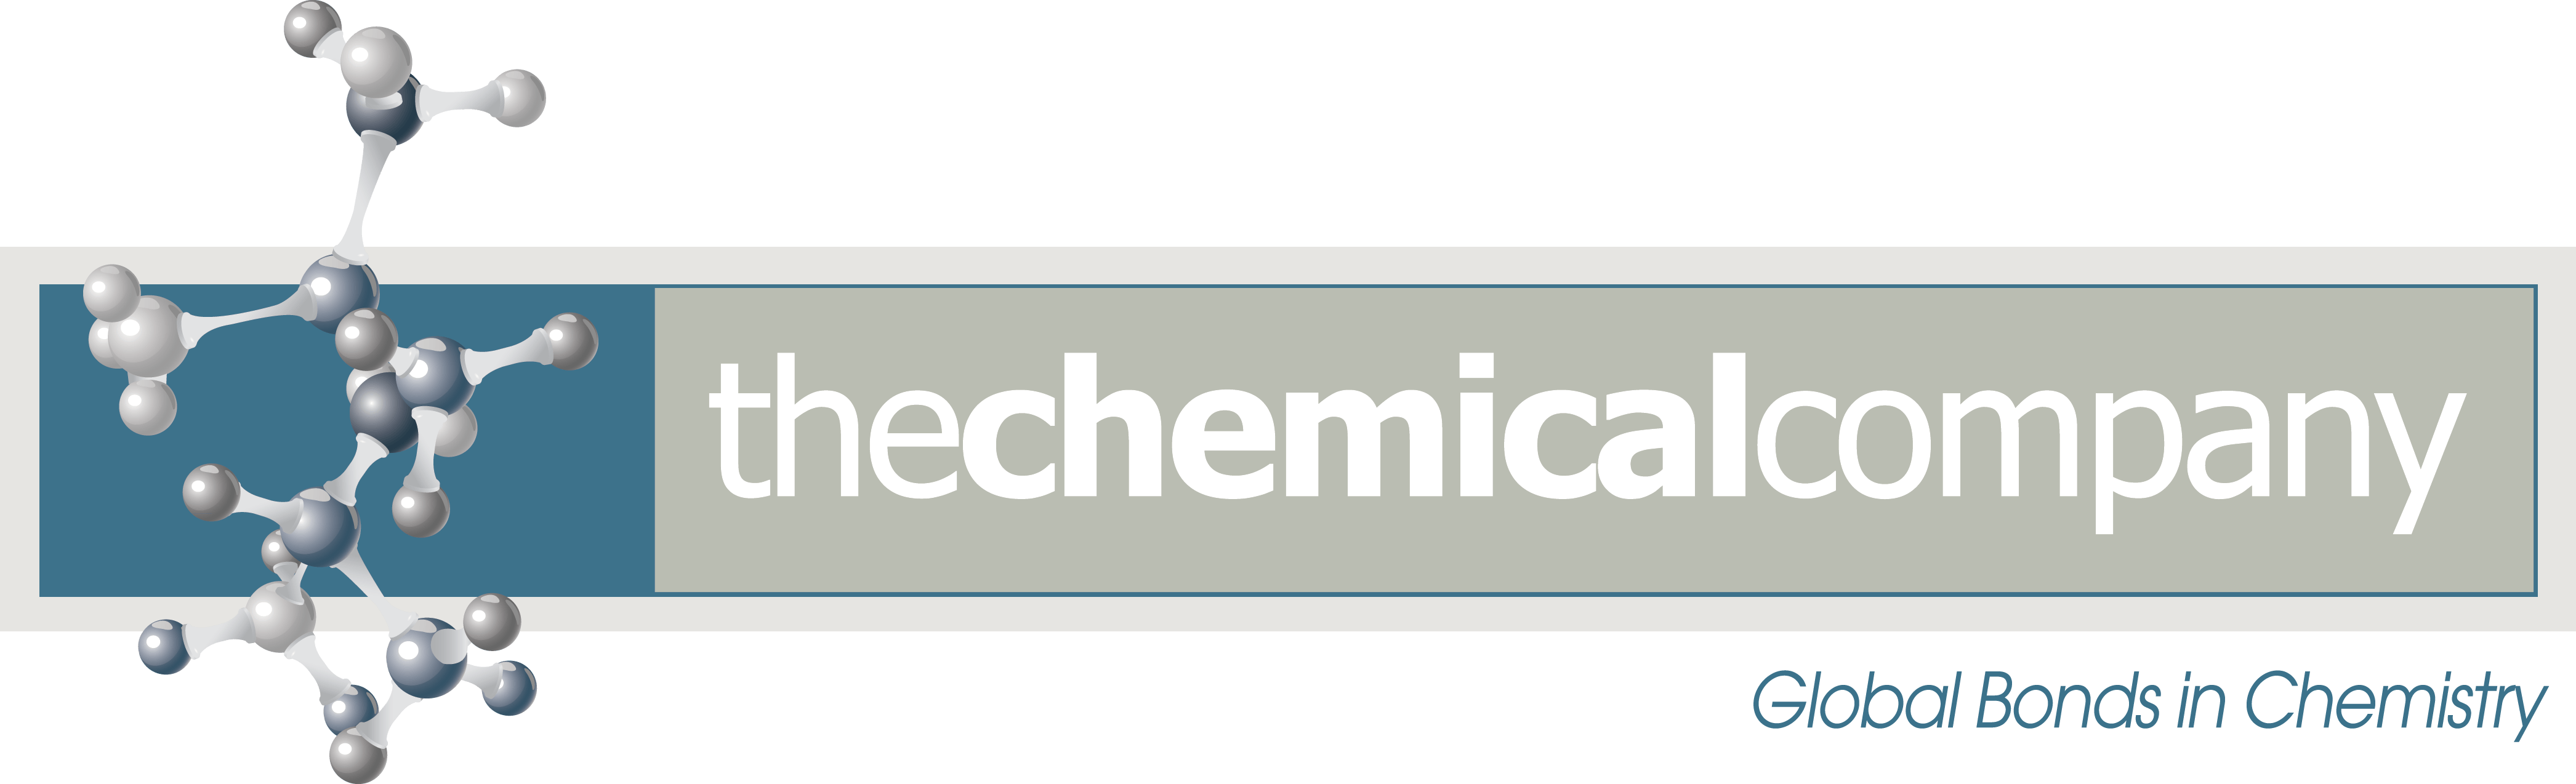 Petrochemical Company Logo - The Chemical Company - Global Chemical Supplier